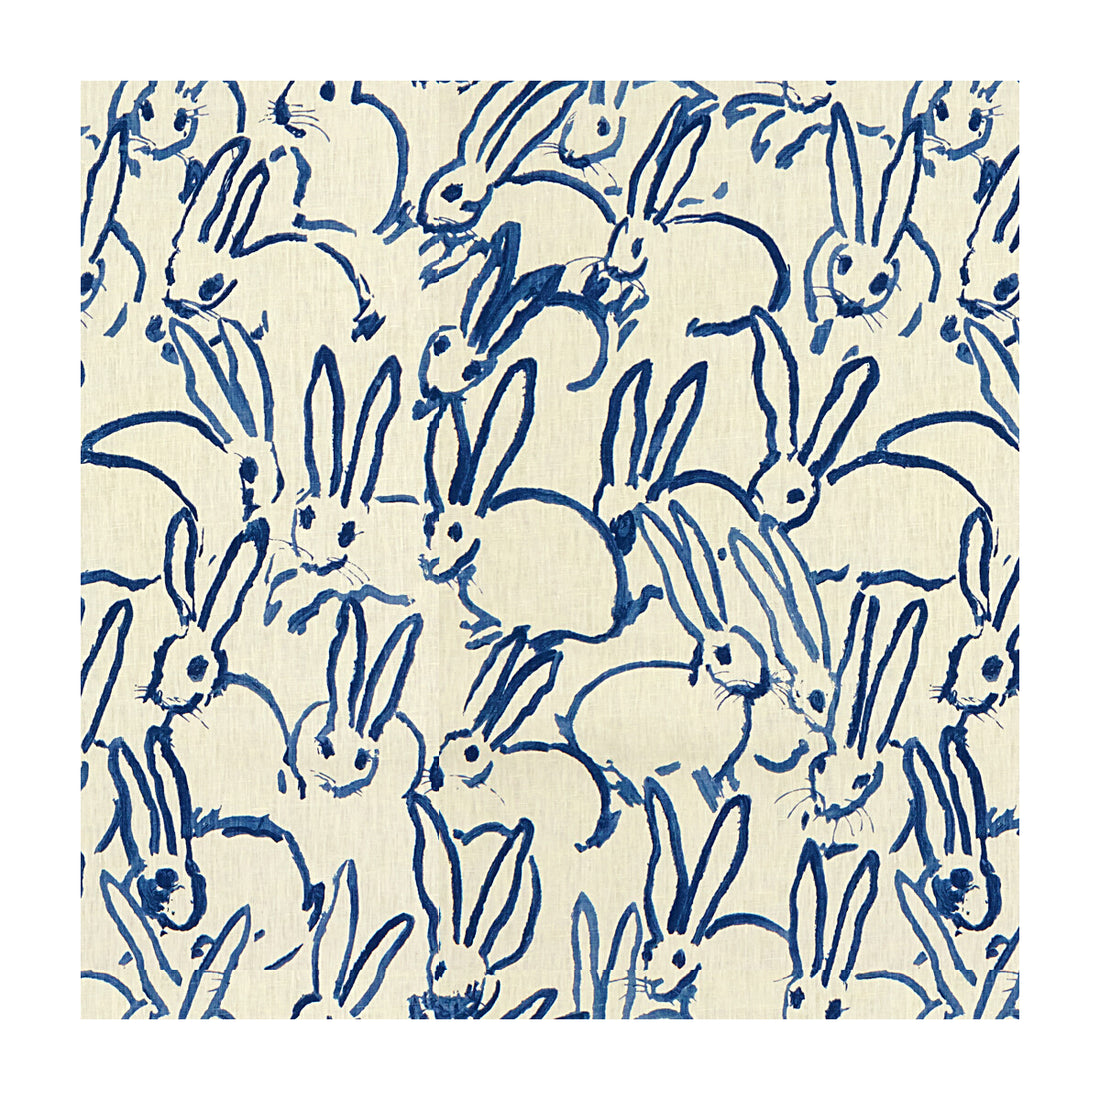 Hutch Print fabric in navy color - pattern GWF-3523.50.0 - by Lee Jofa Modern in the Hunt Slonem For Groundworks collection